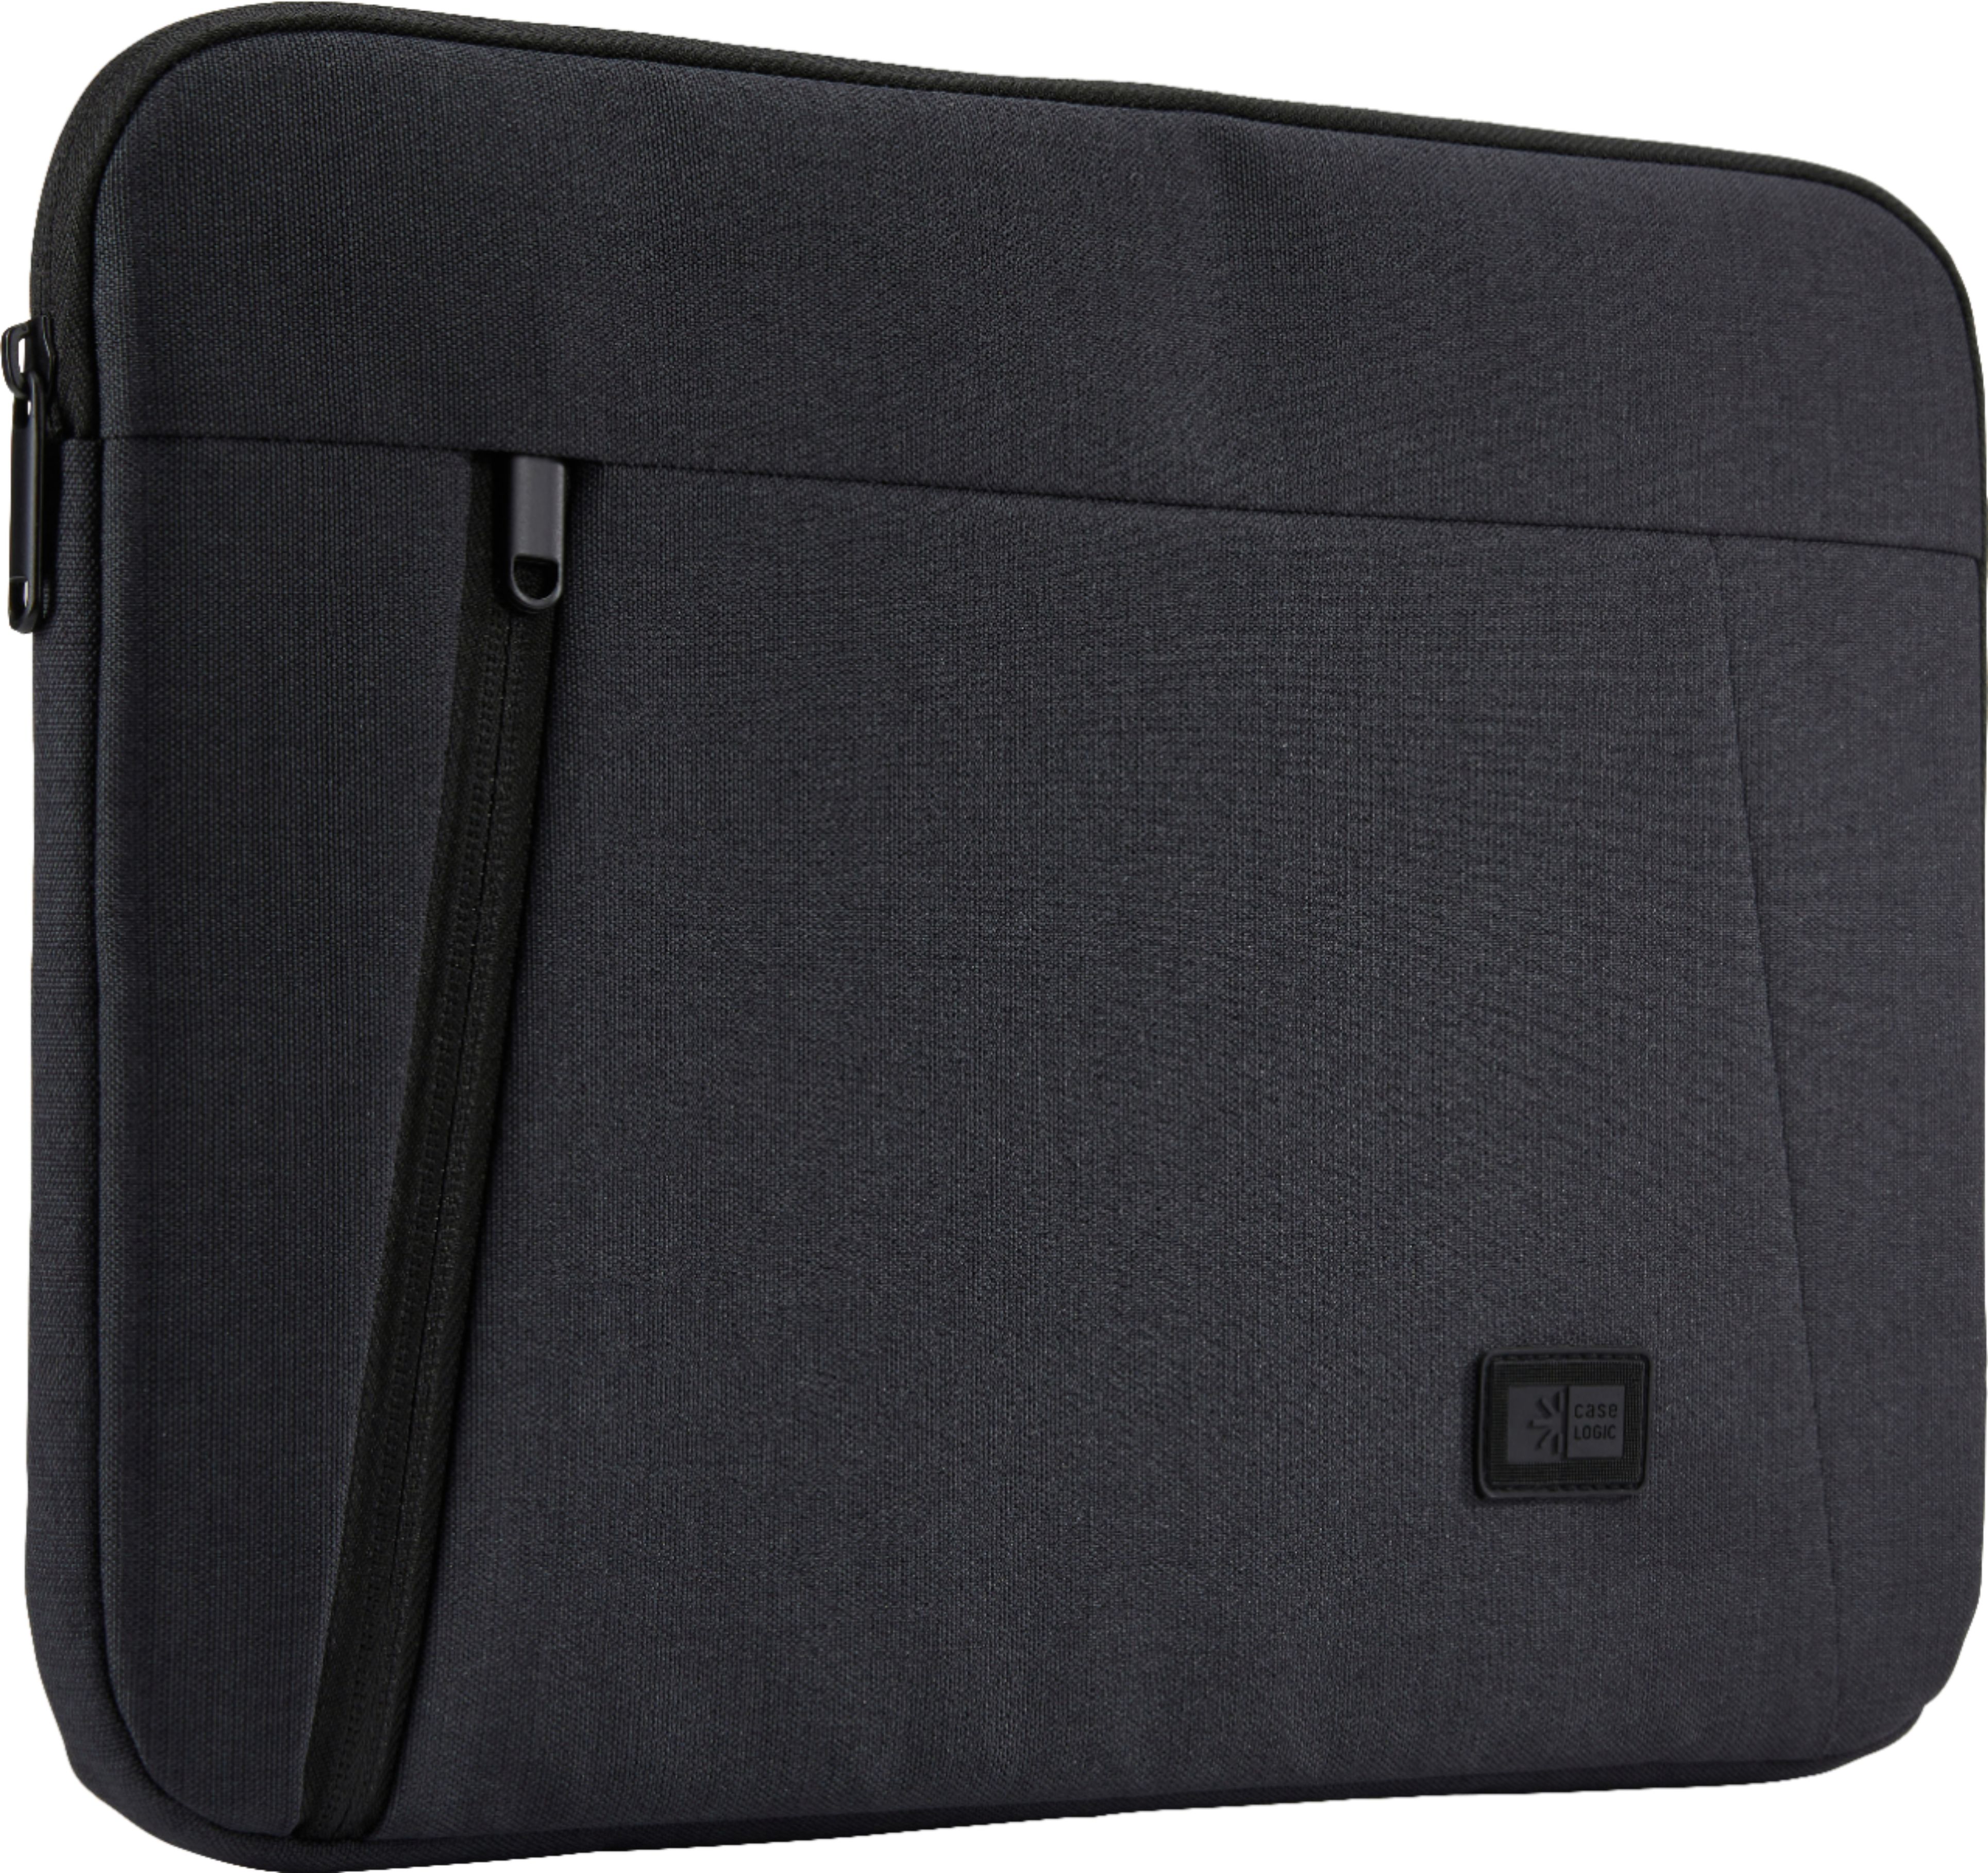 37 affordable tablet cases, covers, and sleeves – Ebook Friendly